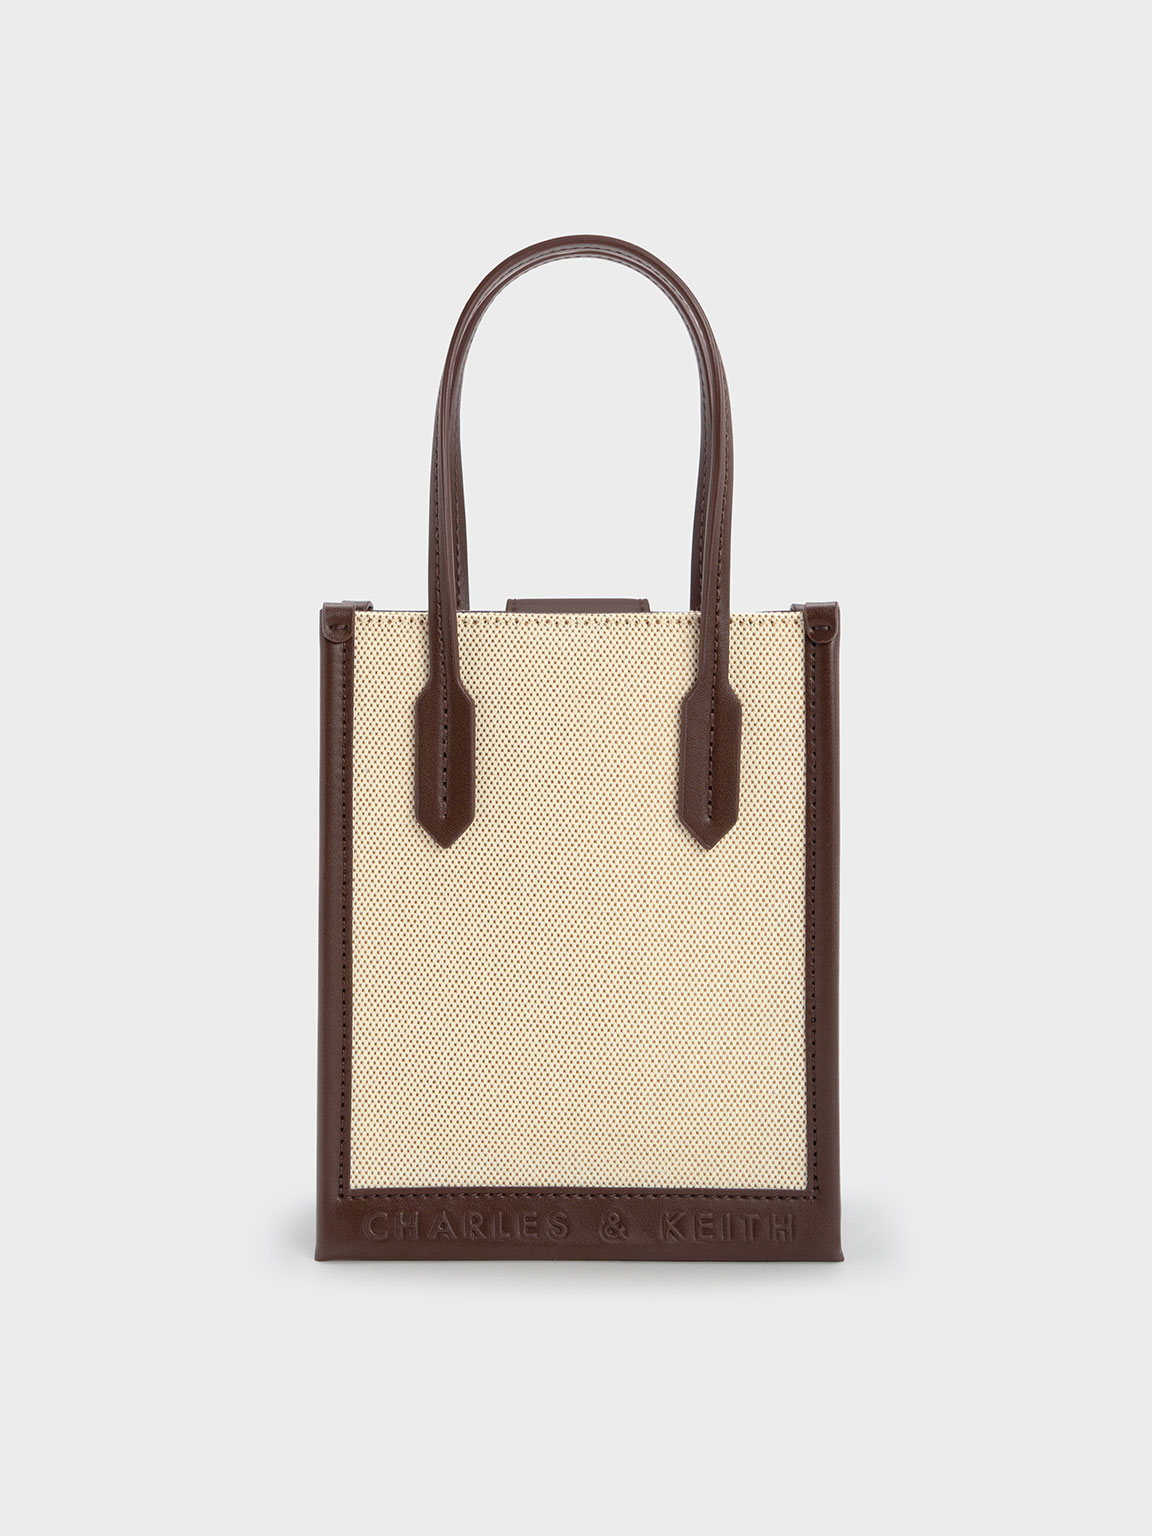 Charles & keith tote bag, Women's Fashion, Bags & Wallets, Tote